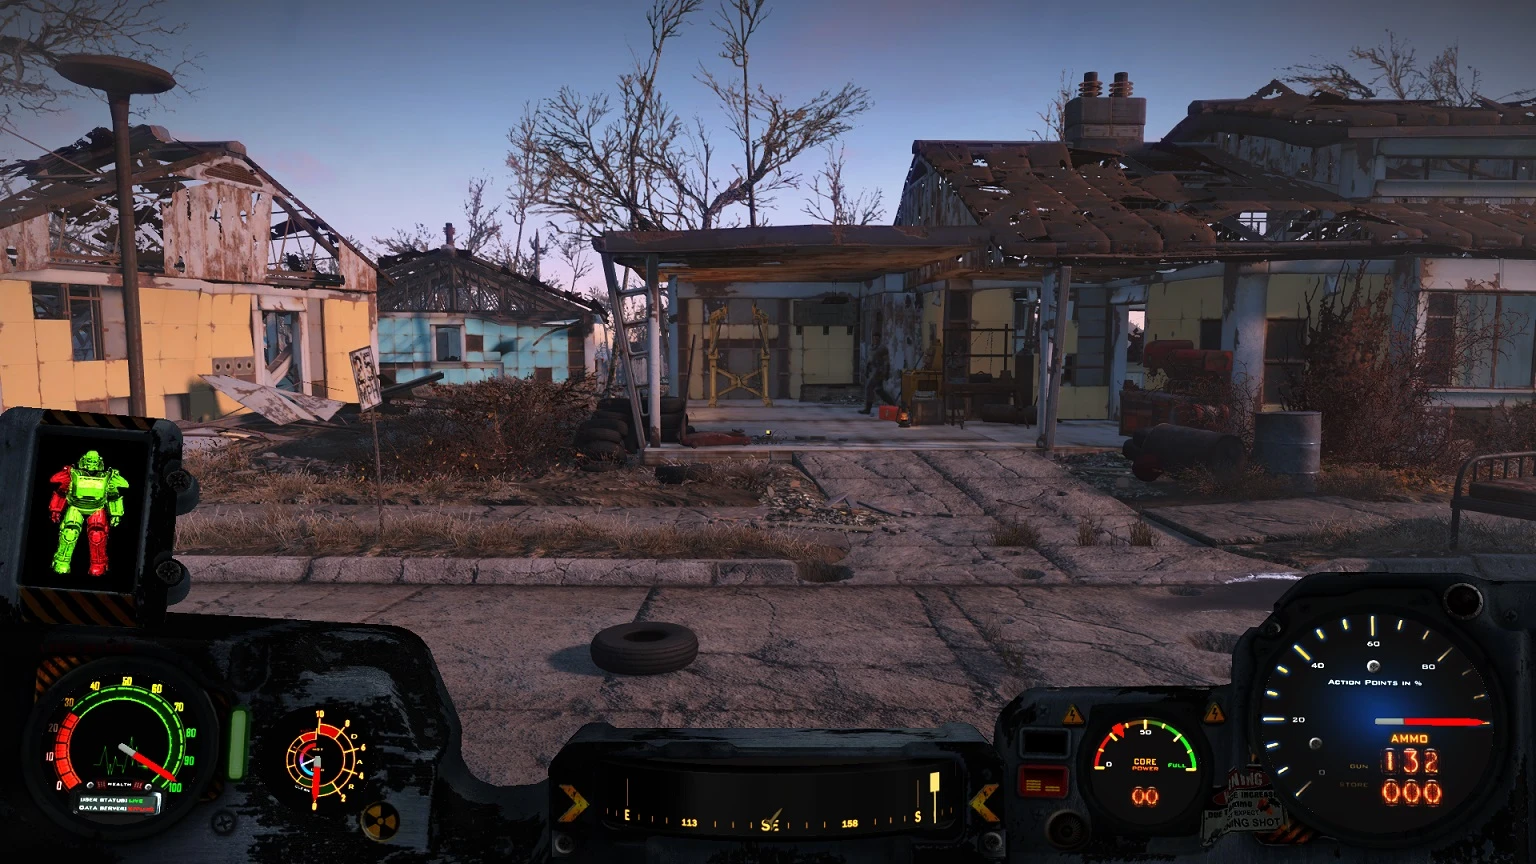 fallout 4 first person view